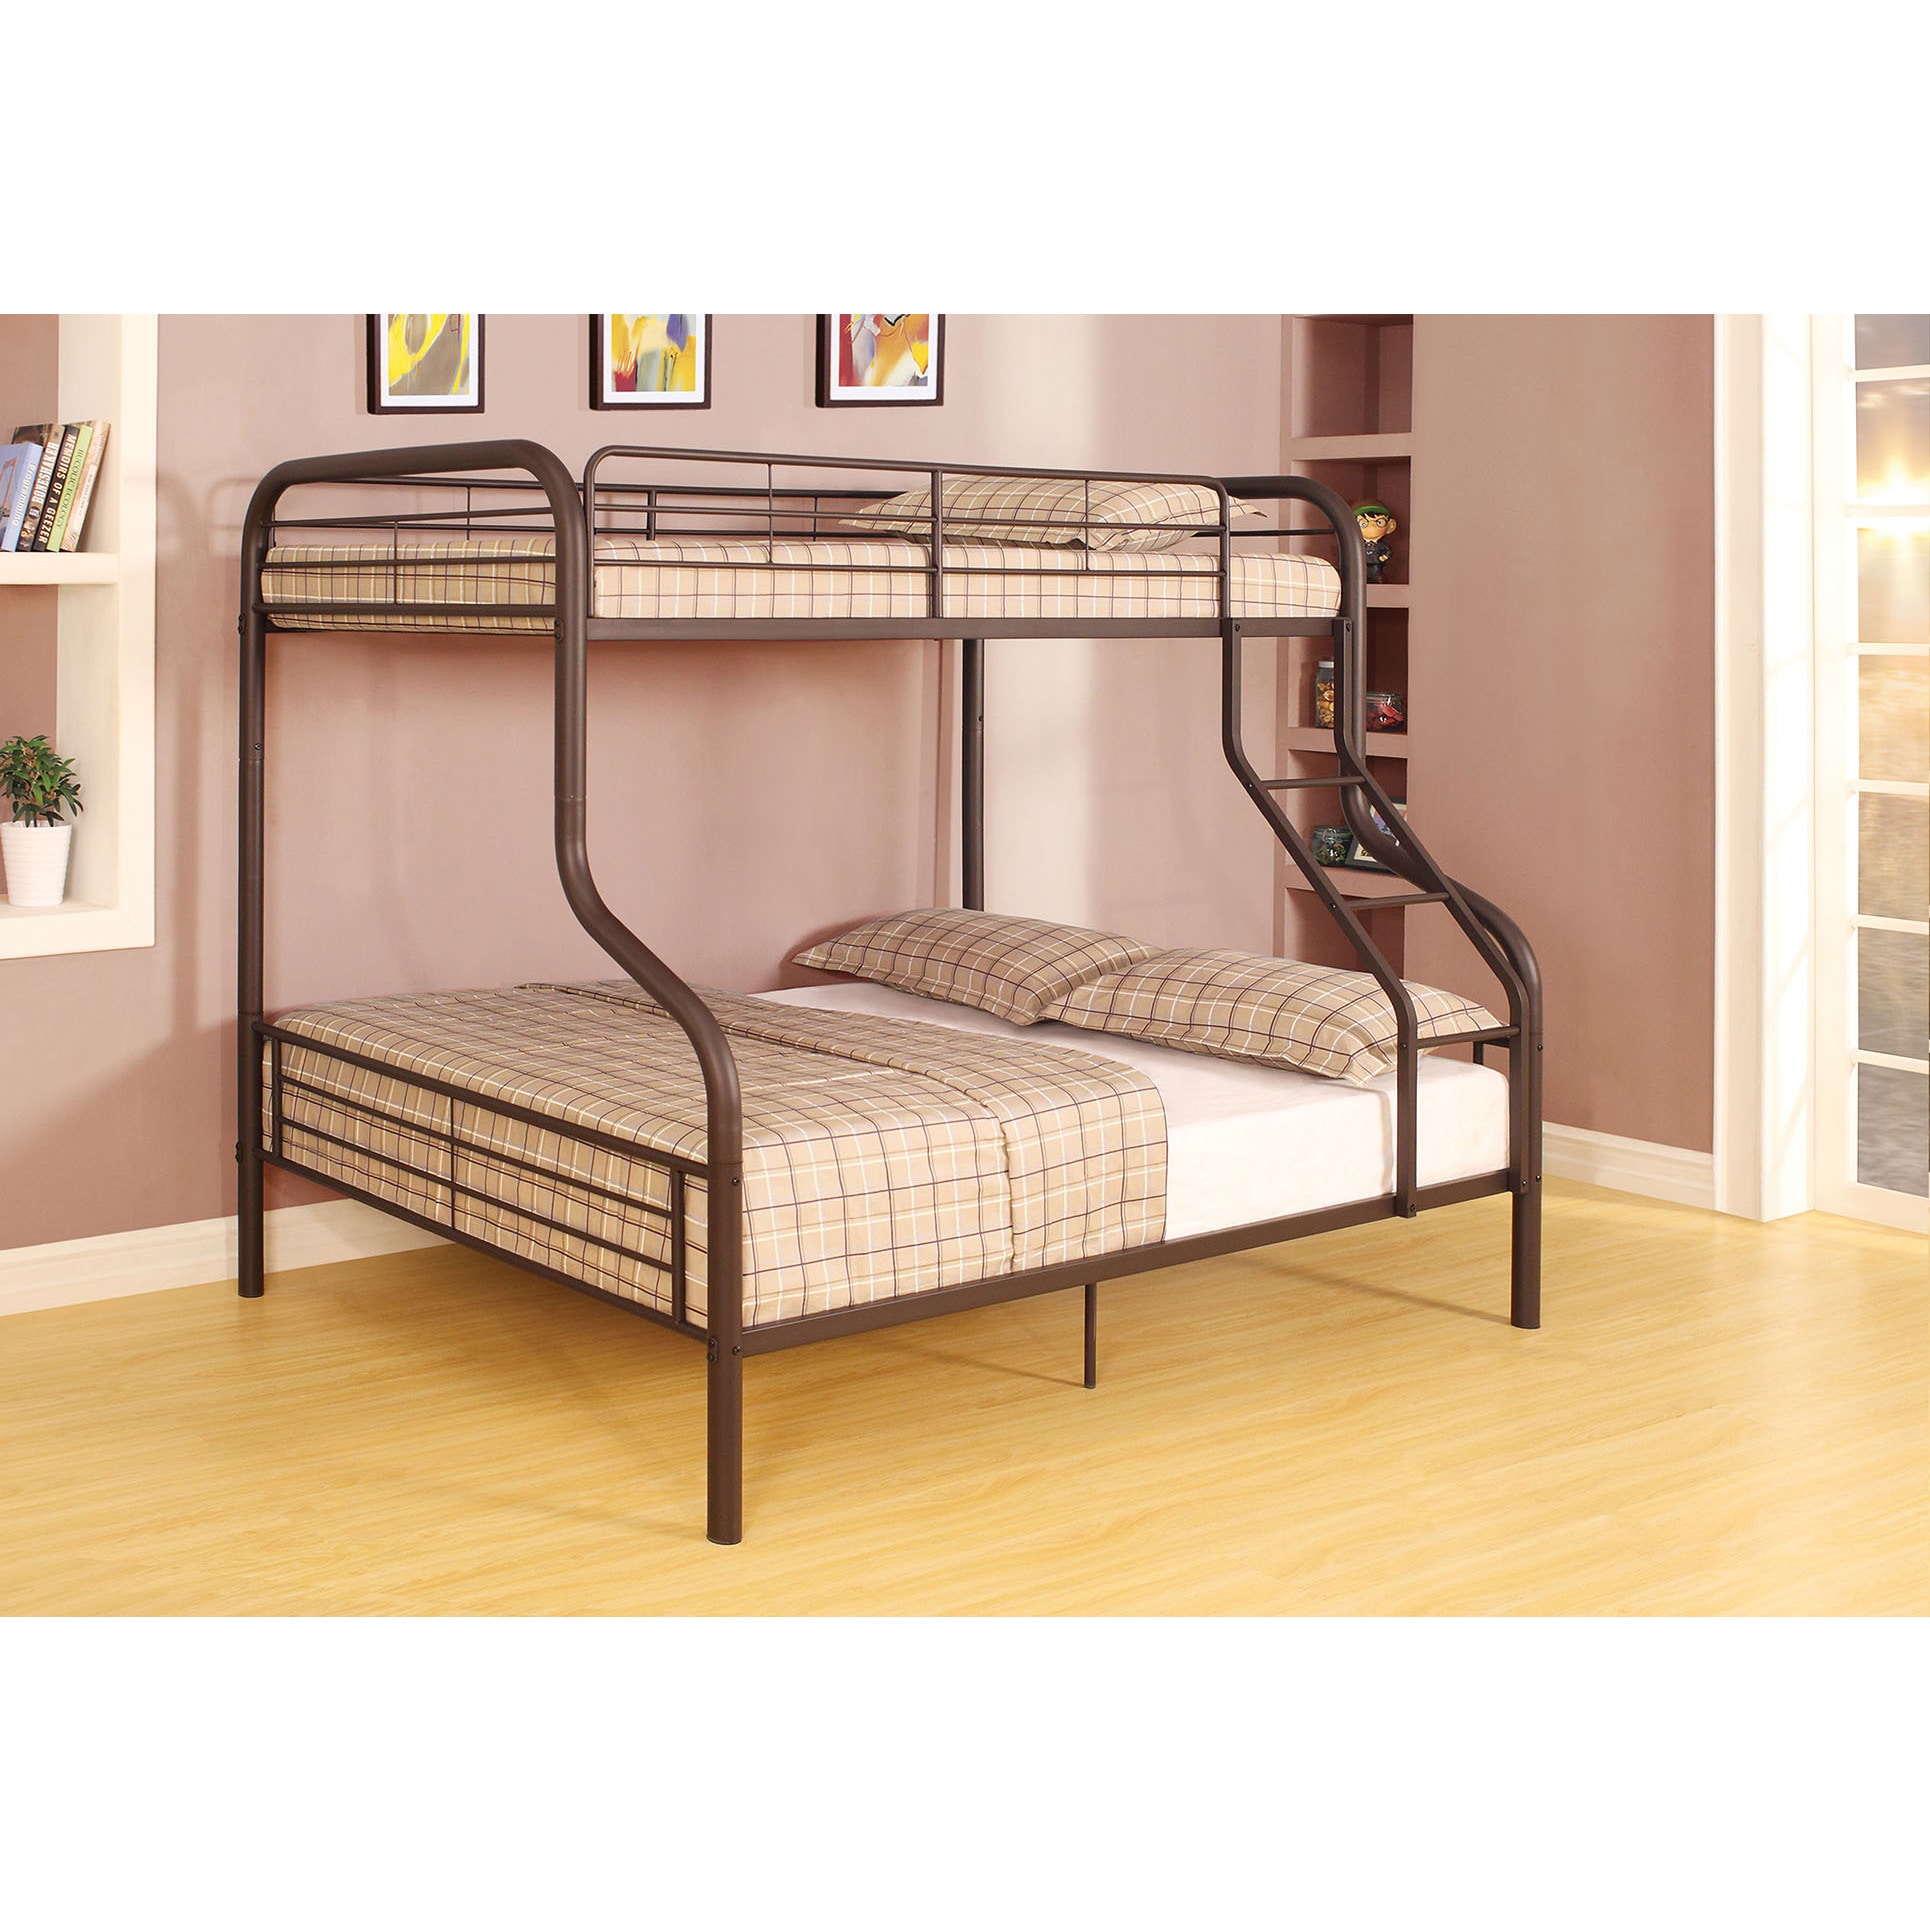 bunk beds that separate